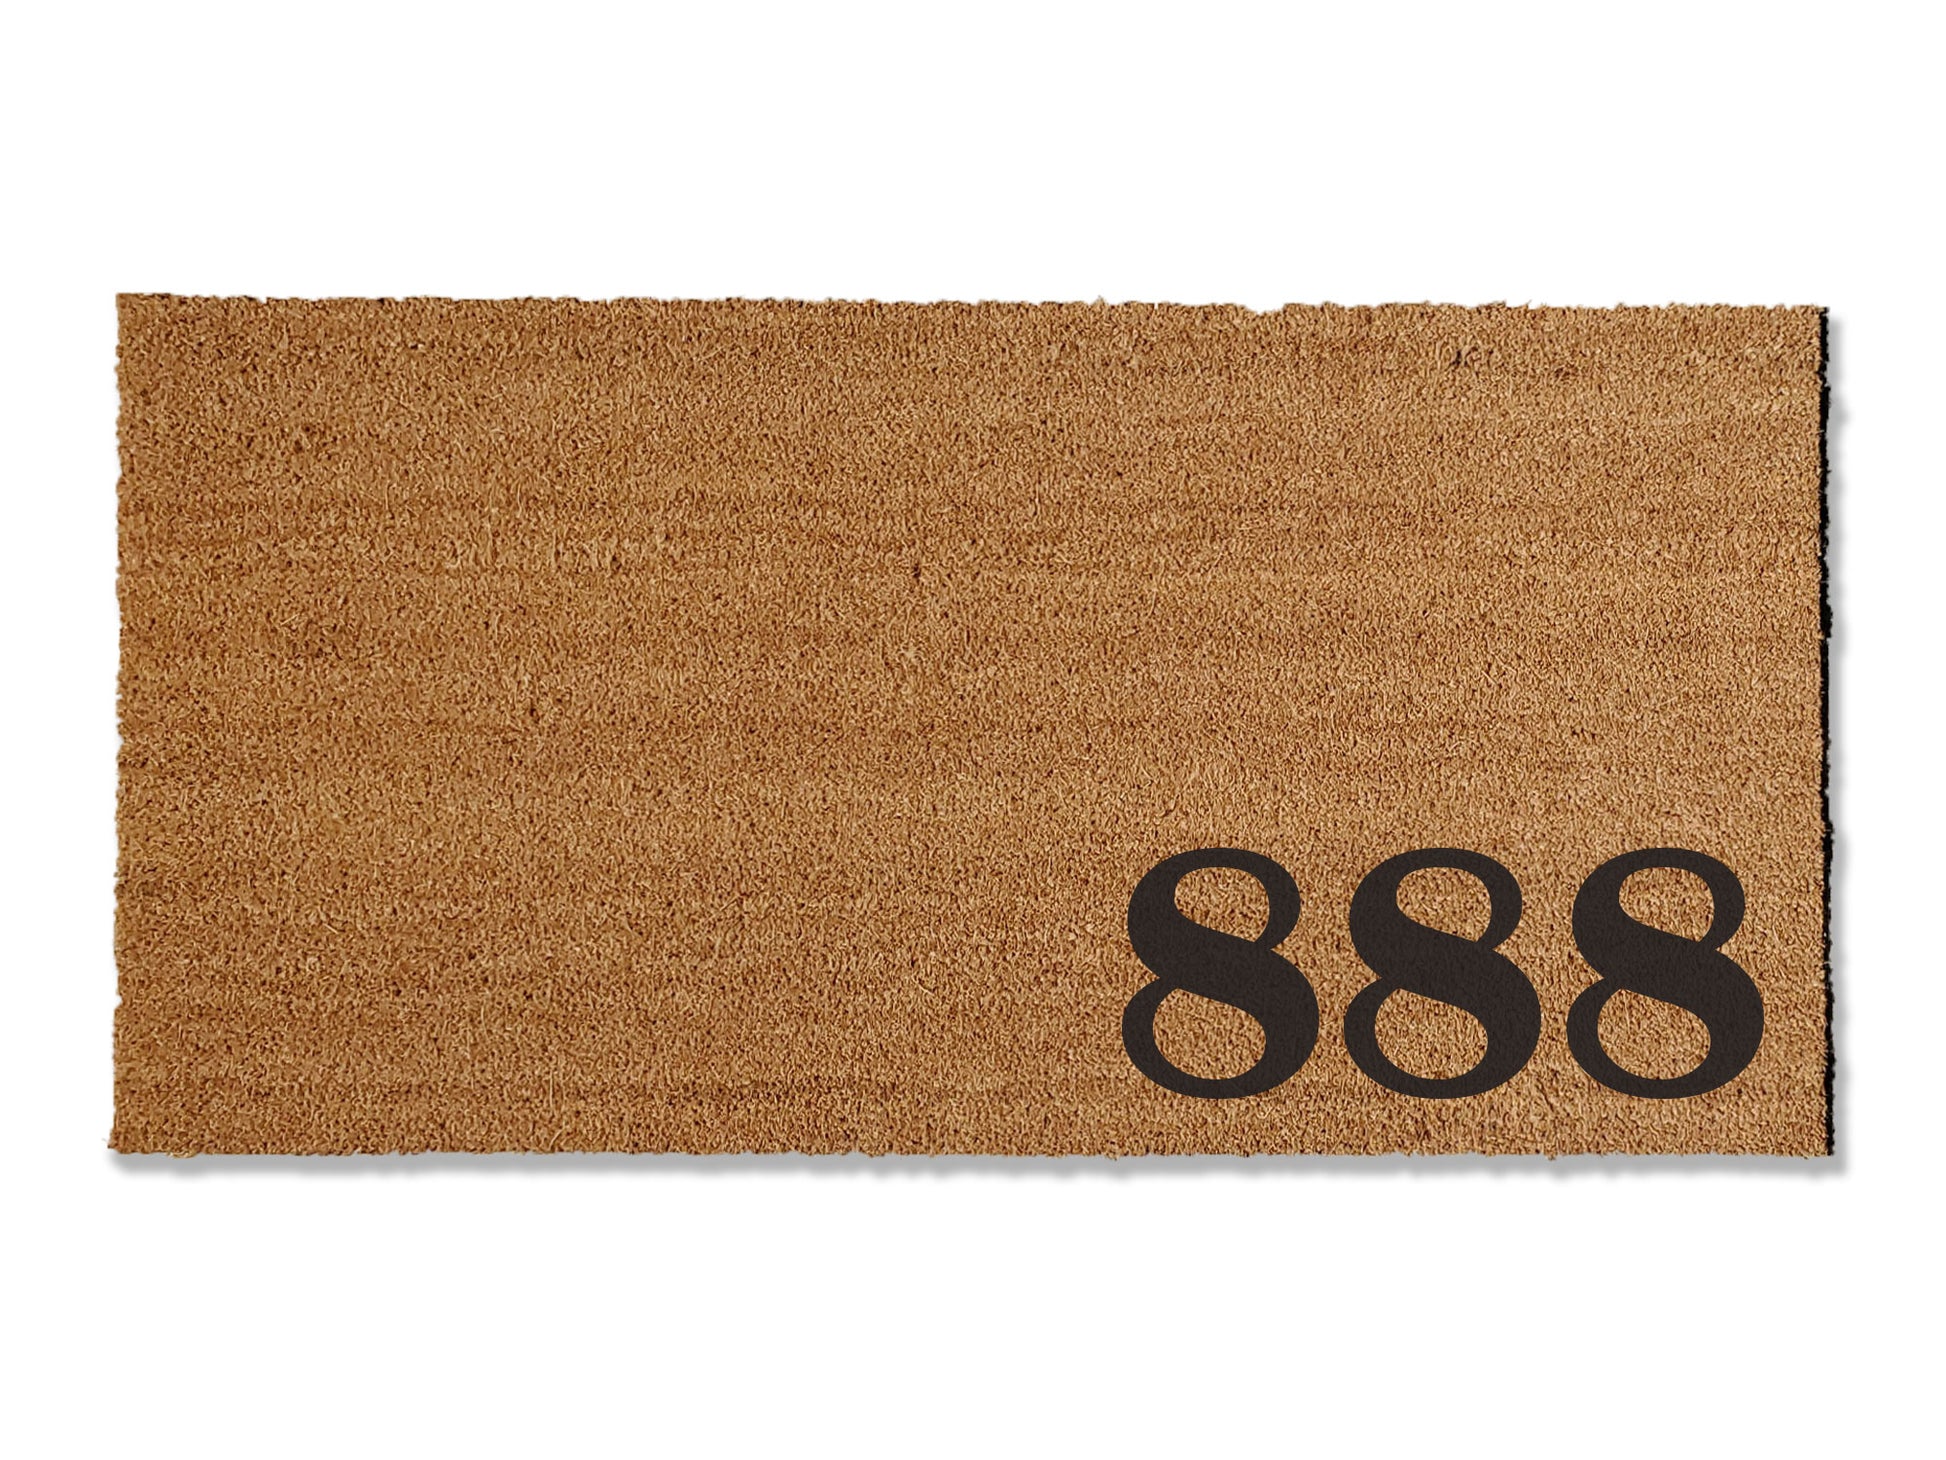 Elevate your entryway with our custom coir doormat, featuring personalized house numbers. Available in multiple sizes, this unique addition adds a touch of sophistication to your home's exterior. Make a statement and welcome guests with style by showcasing your house numbers on this versatile coir doormat.